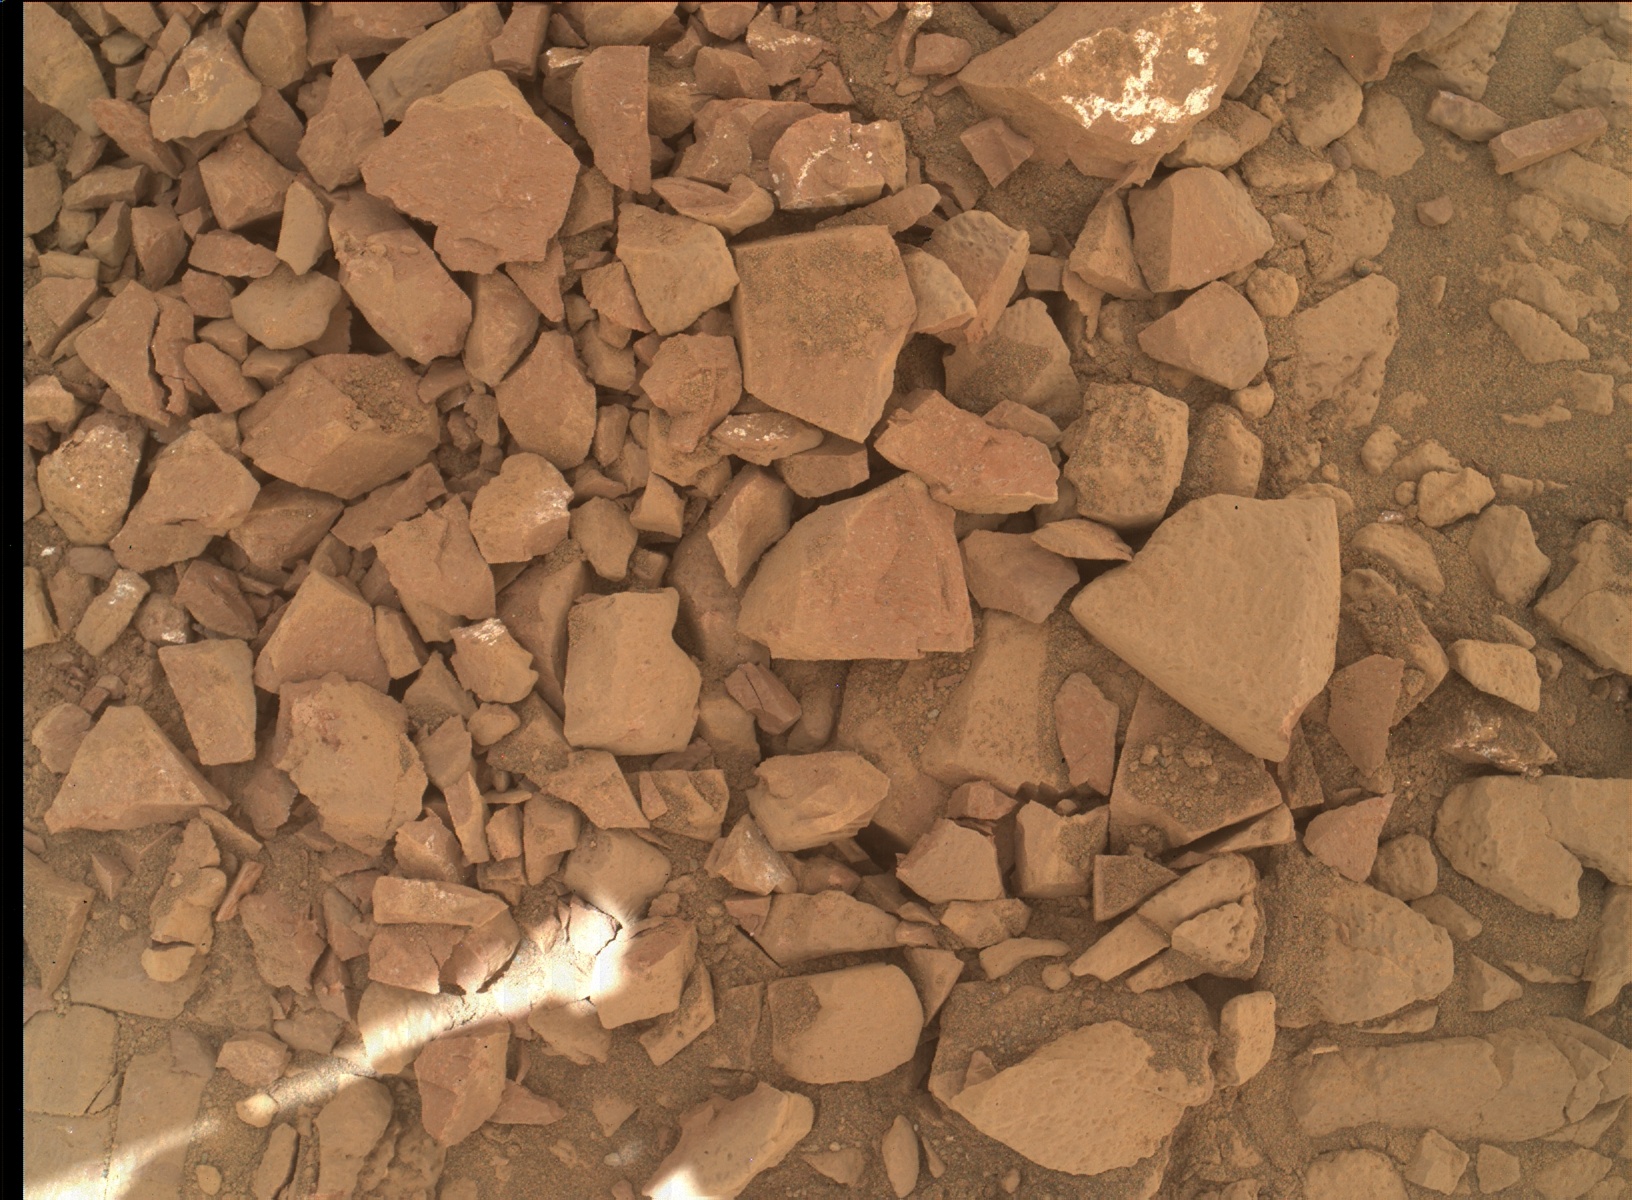 Nasa's Mars rover Curiosity acquired this image using its Mars Hand Lens Imager (MAHLI) on Sol 1405